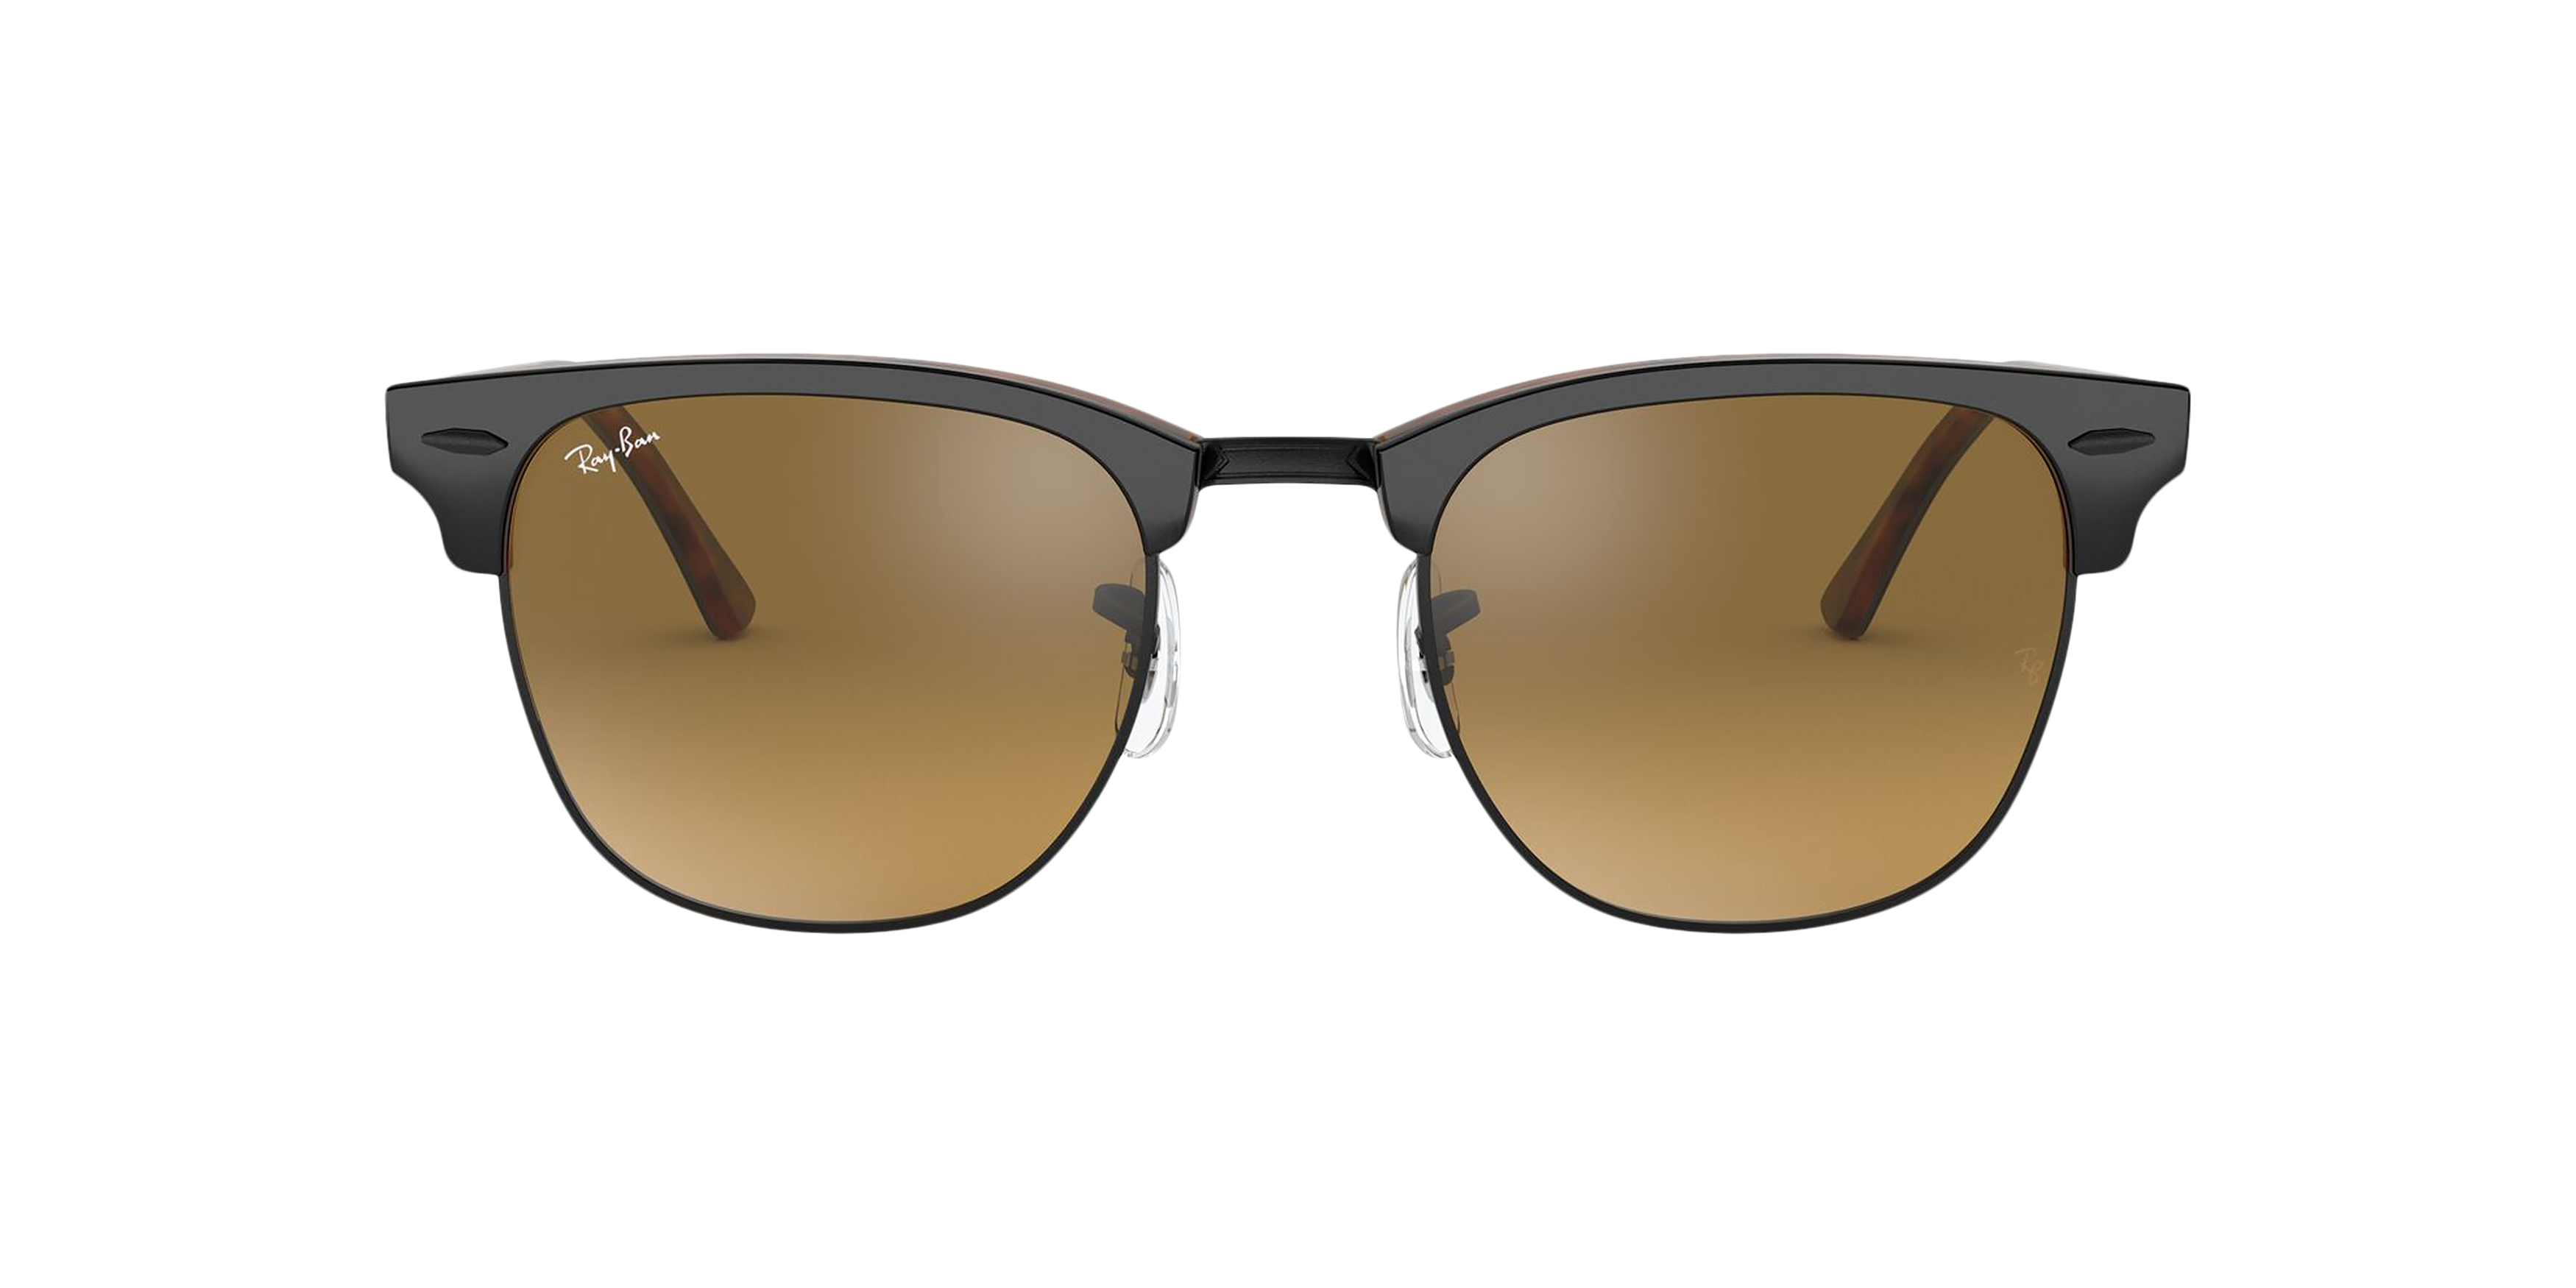 [products.image.front] Ray-Ban Clubmaster Color Mix RB3016 12773K